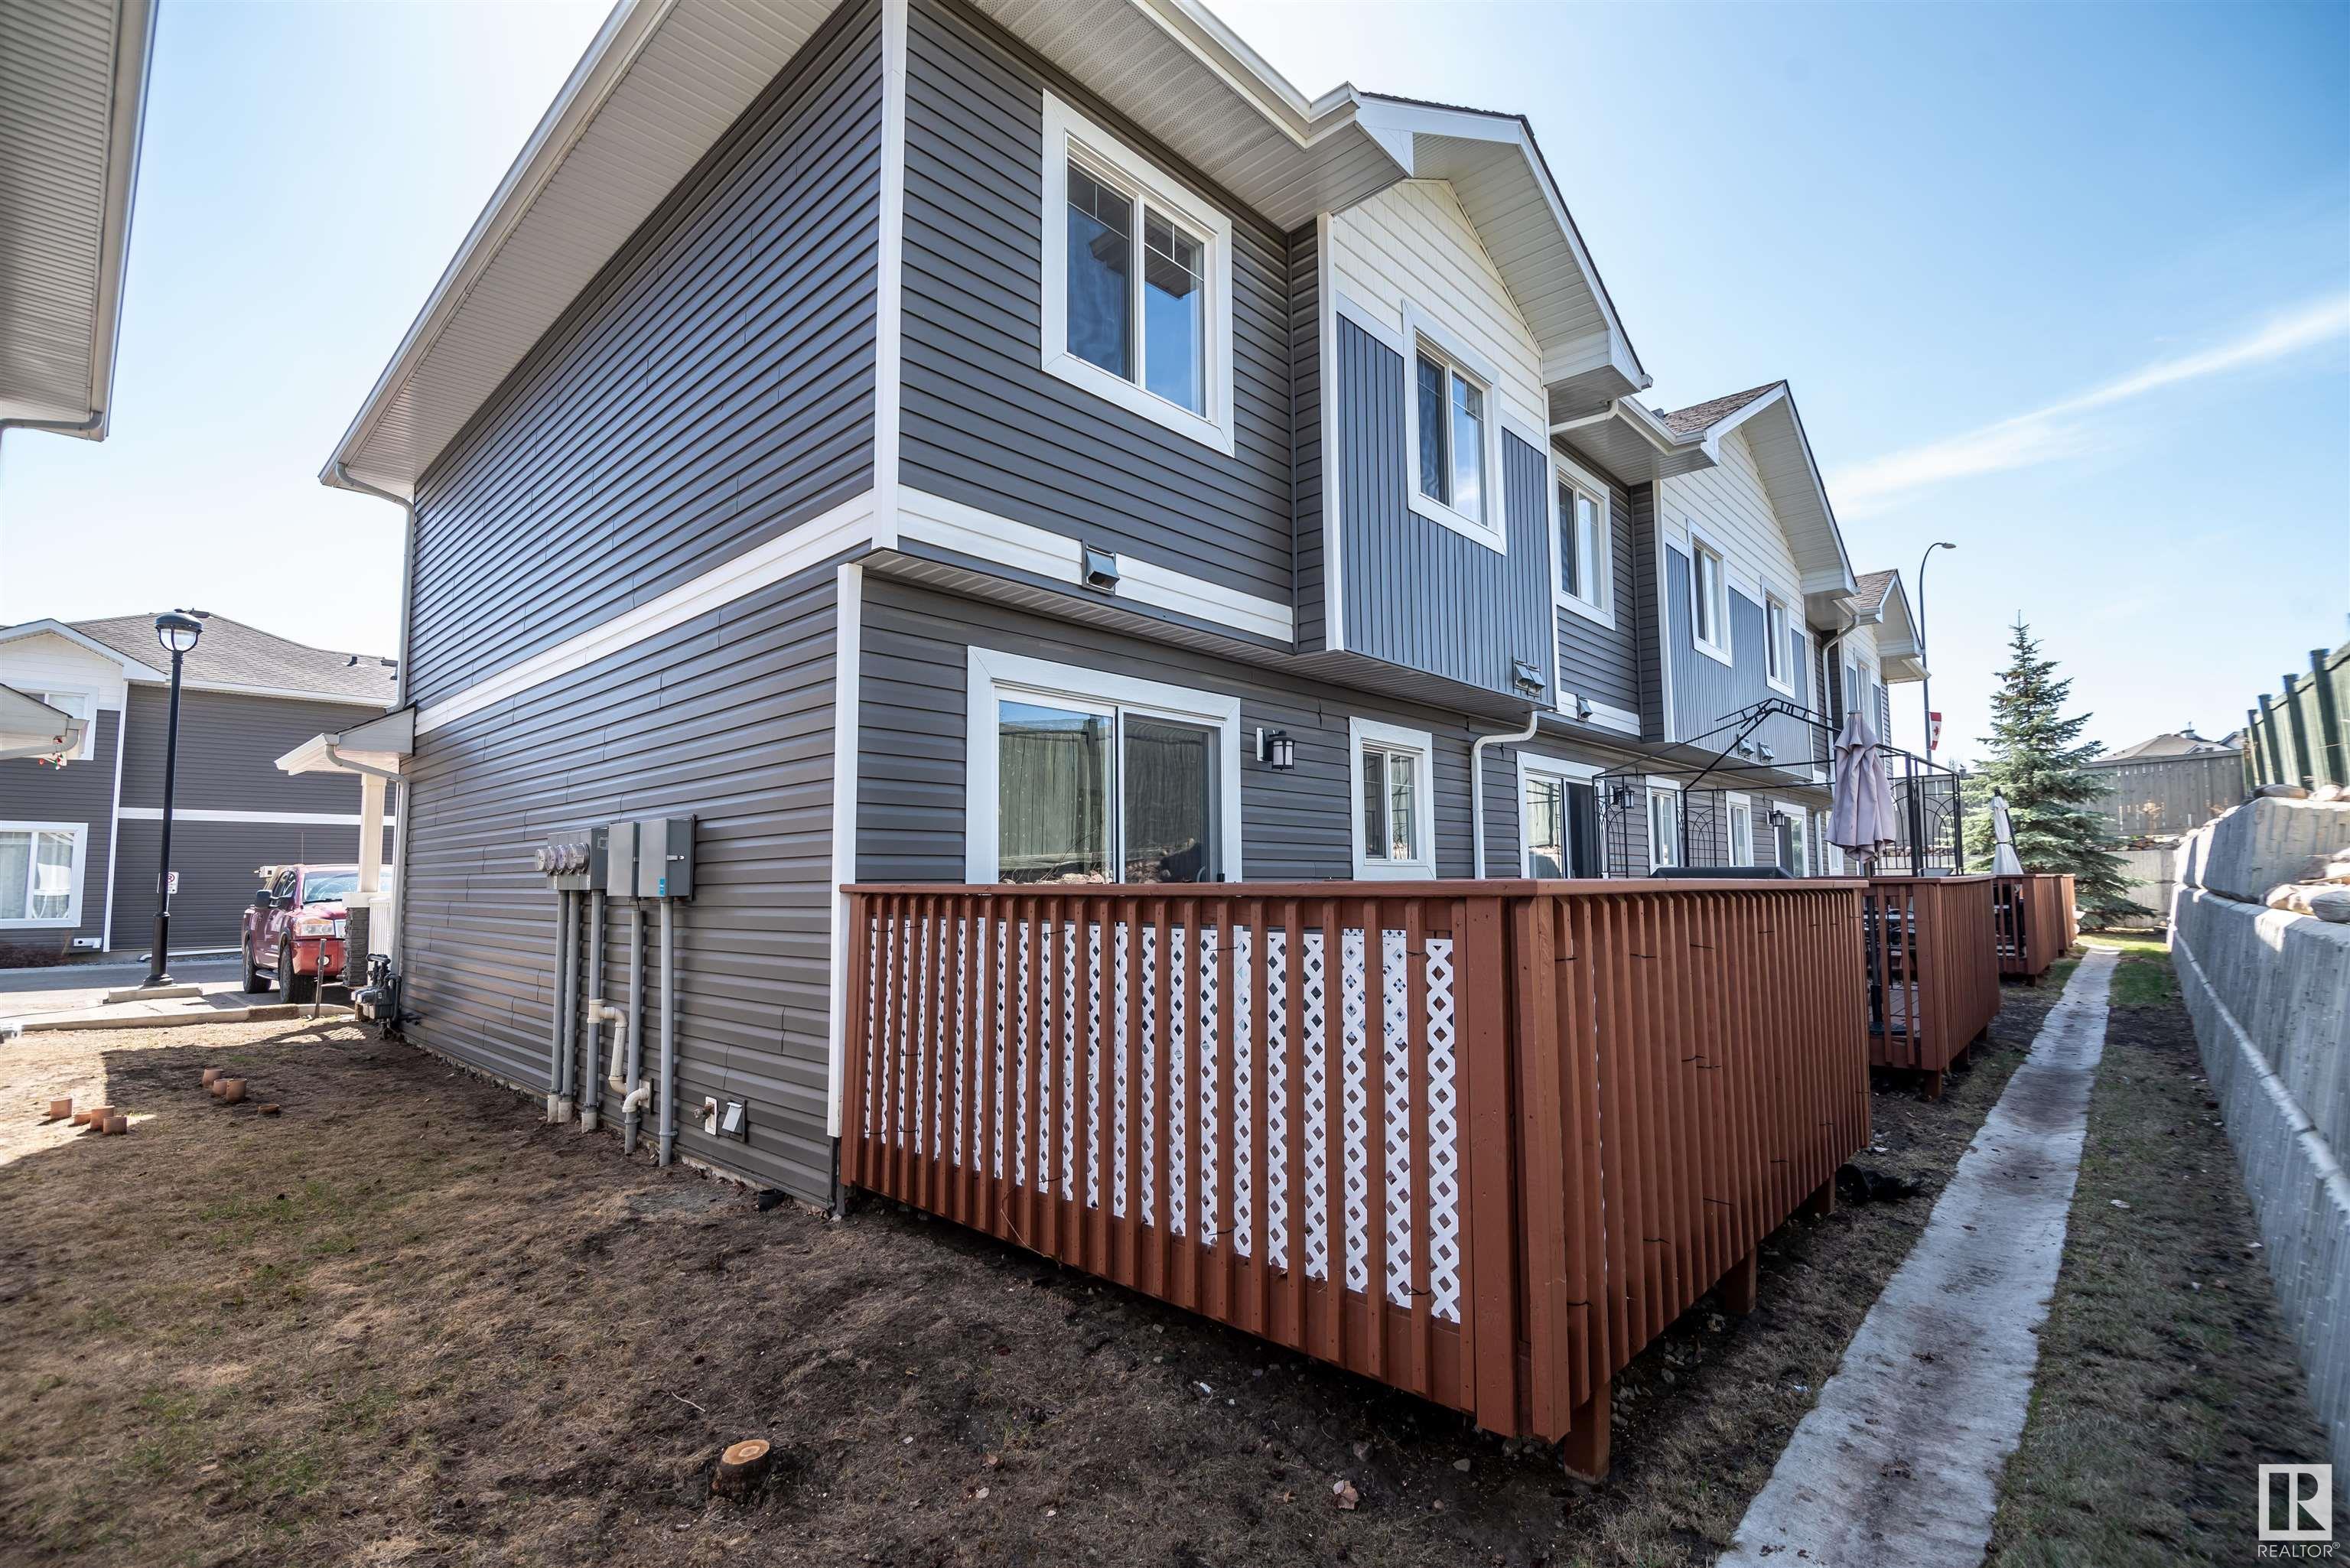      #12 500 GROVE DR , Spruce Grove,  ,T7X 0P6 ;  Listing Number: MLS E4332411